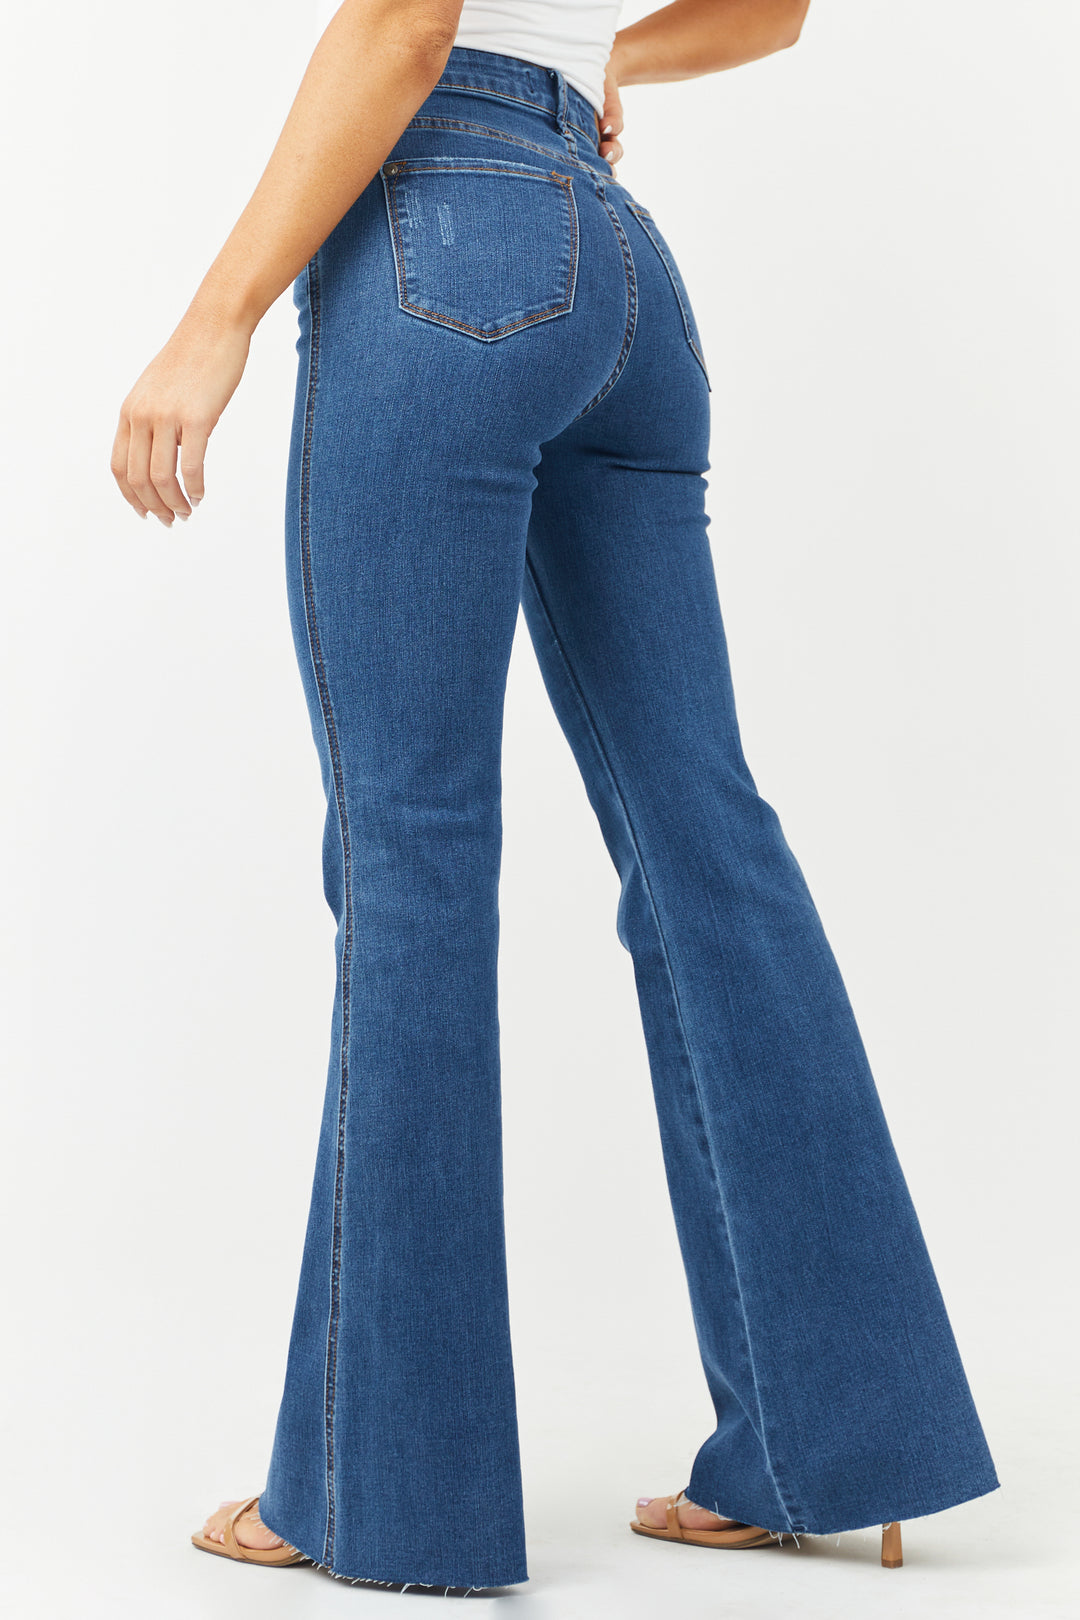 Judy Blue Dark Wash High Rise Control Top Flare Jeans & Lime Lush